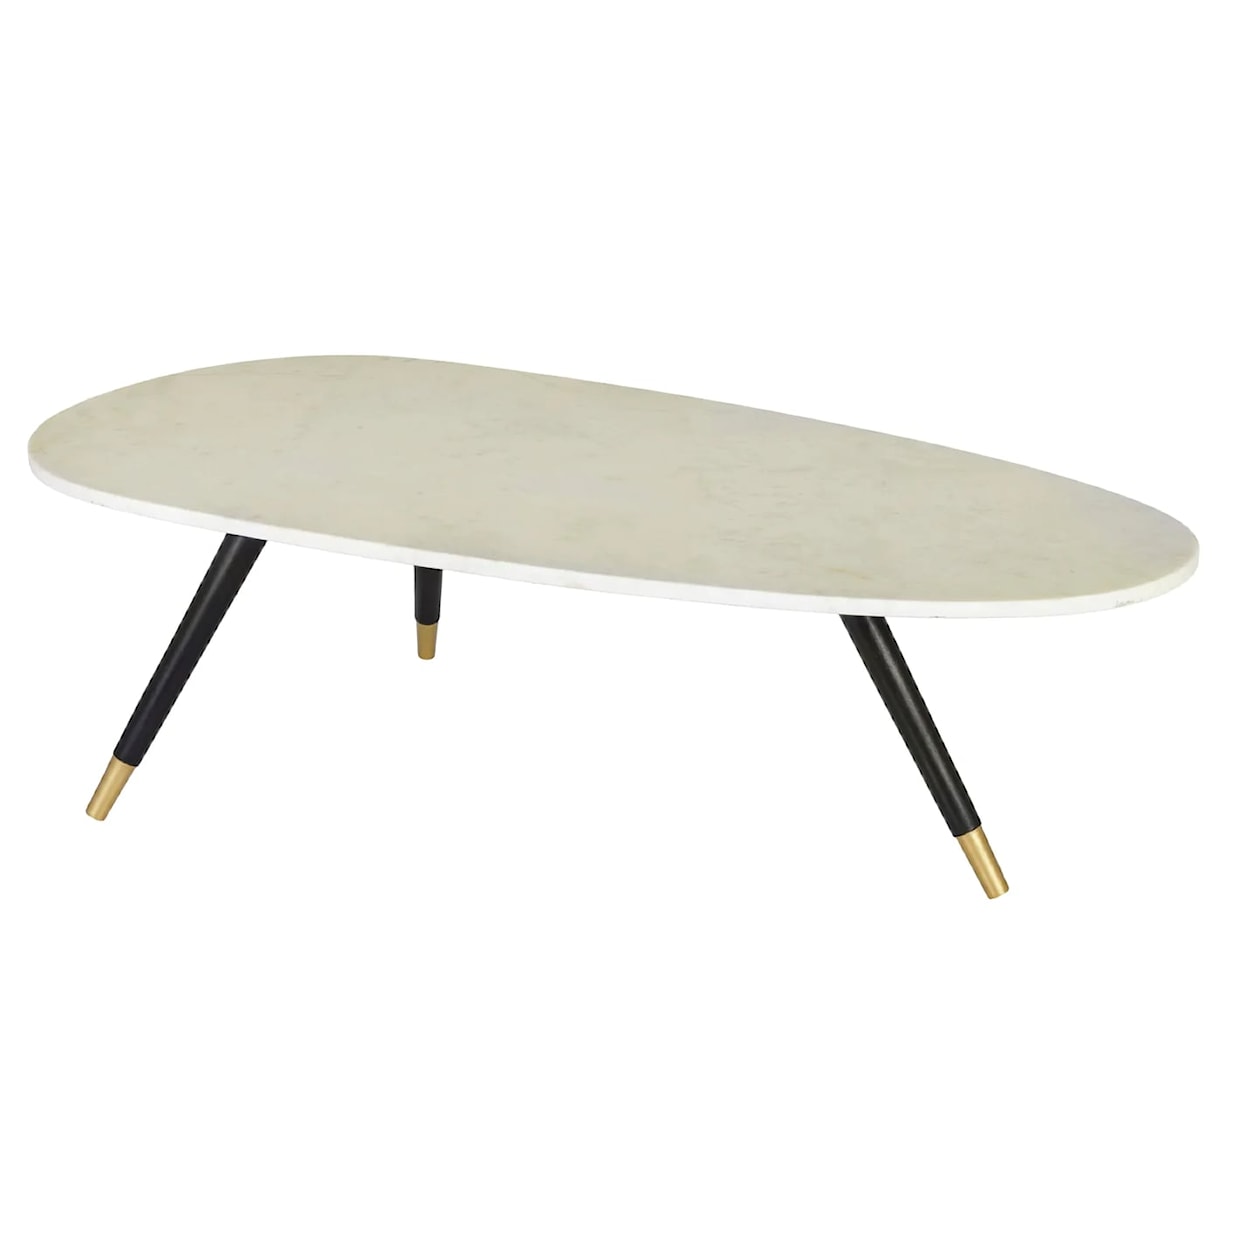 Surya Rugs Accessories Miami Coffee Table